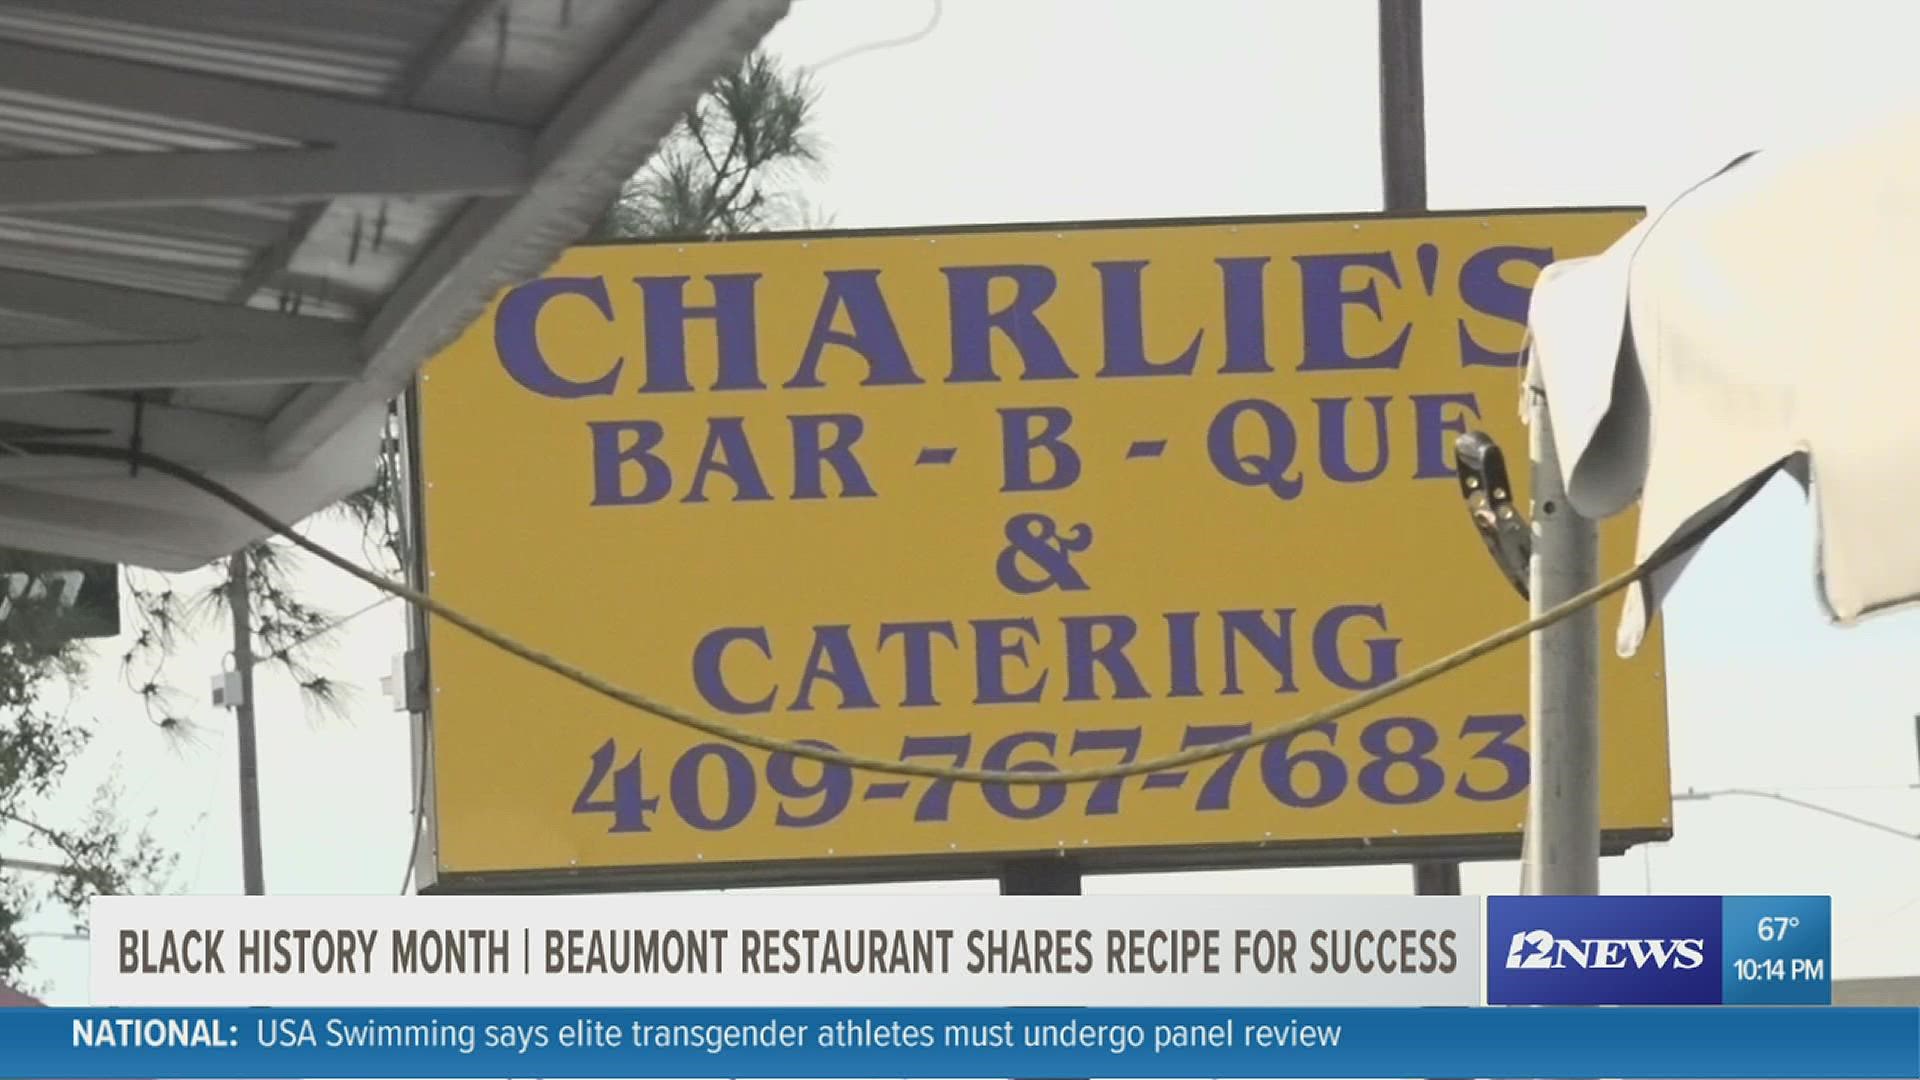 Charlie's Bar-B-Que is one of the tasty smoked barbecue spots in our community. It grew from a well-known food truck into a popular restaurant.